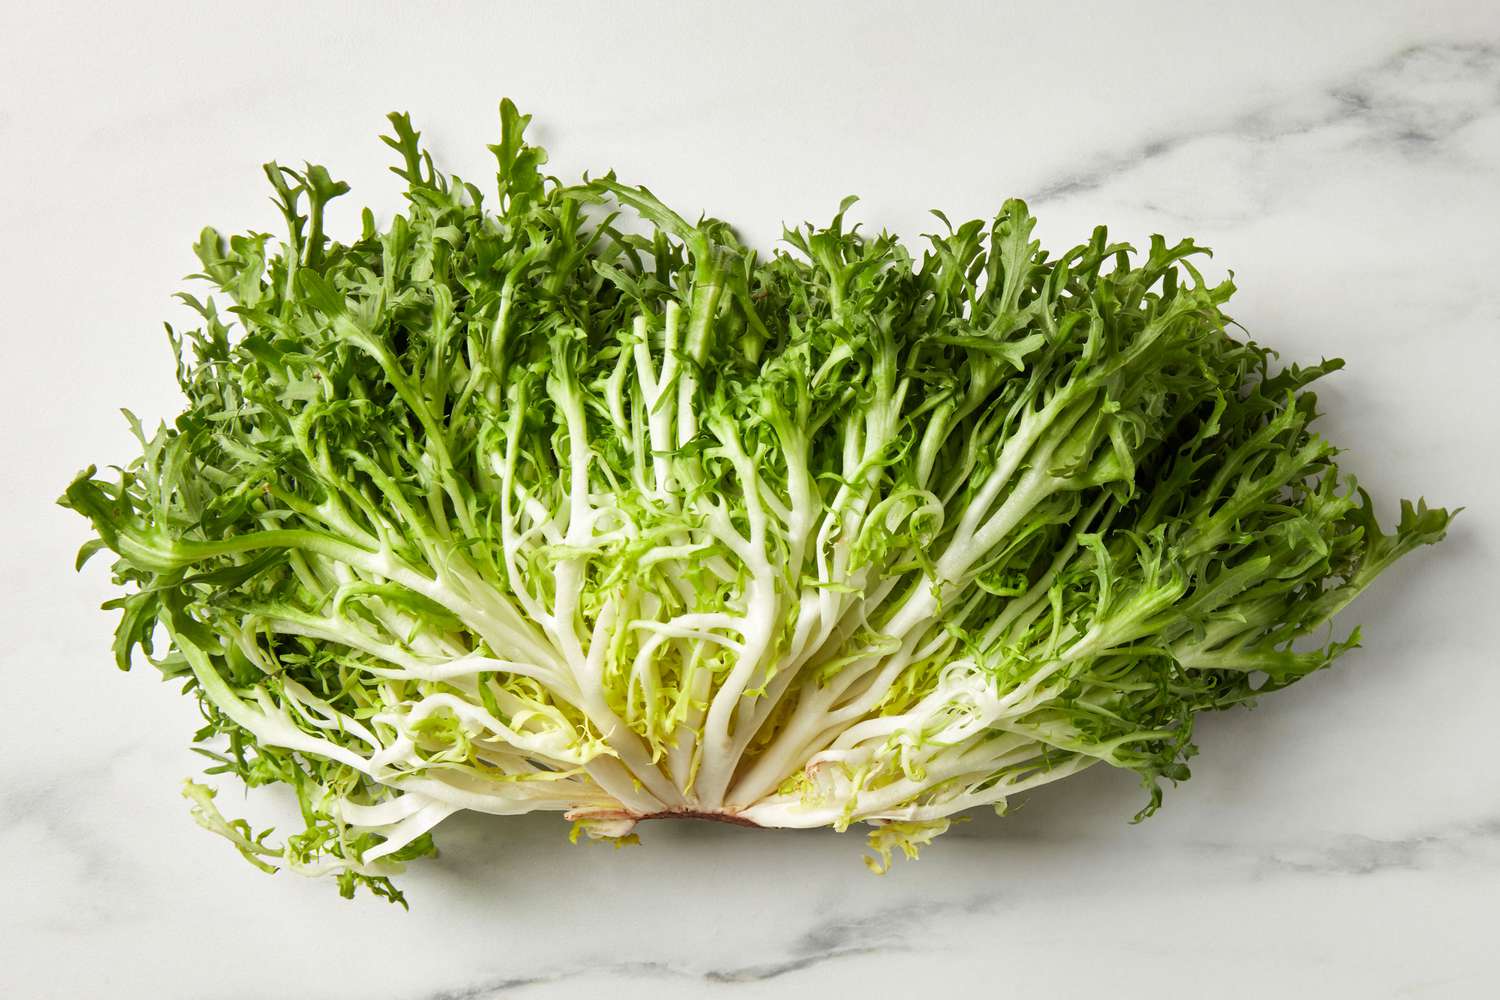 A head of frisee lettuce on a marble surface